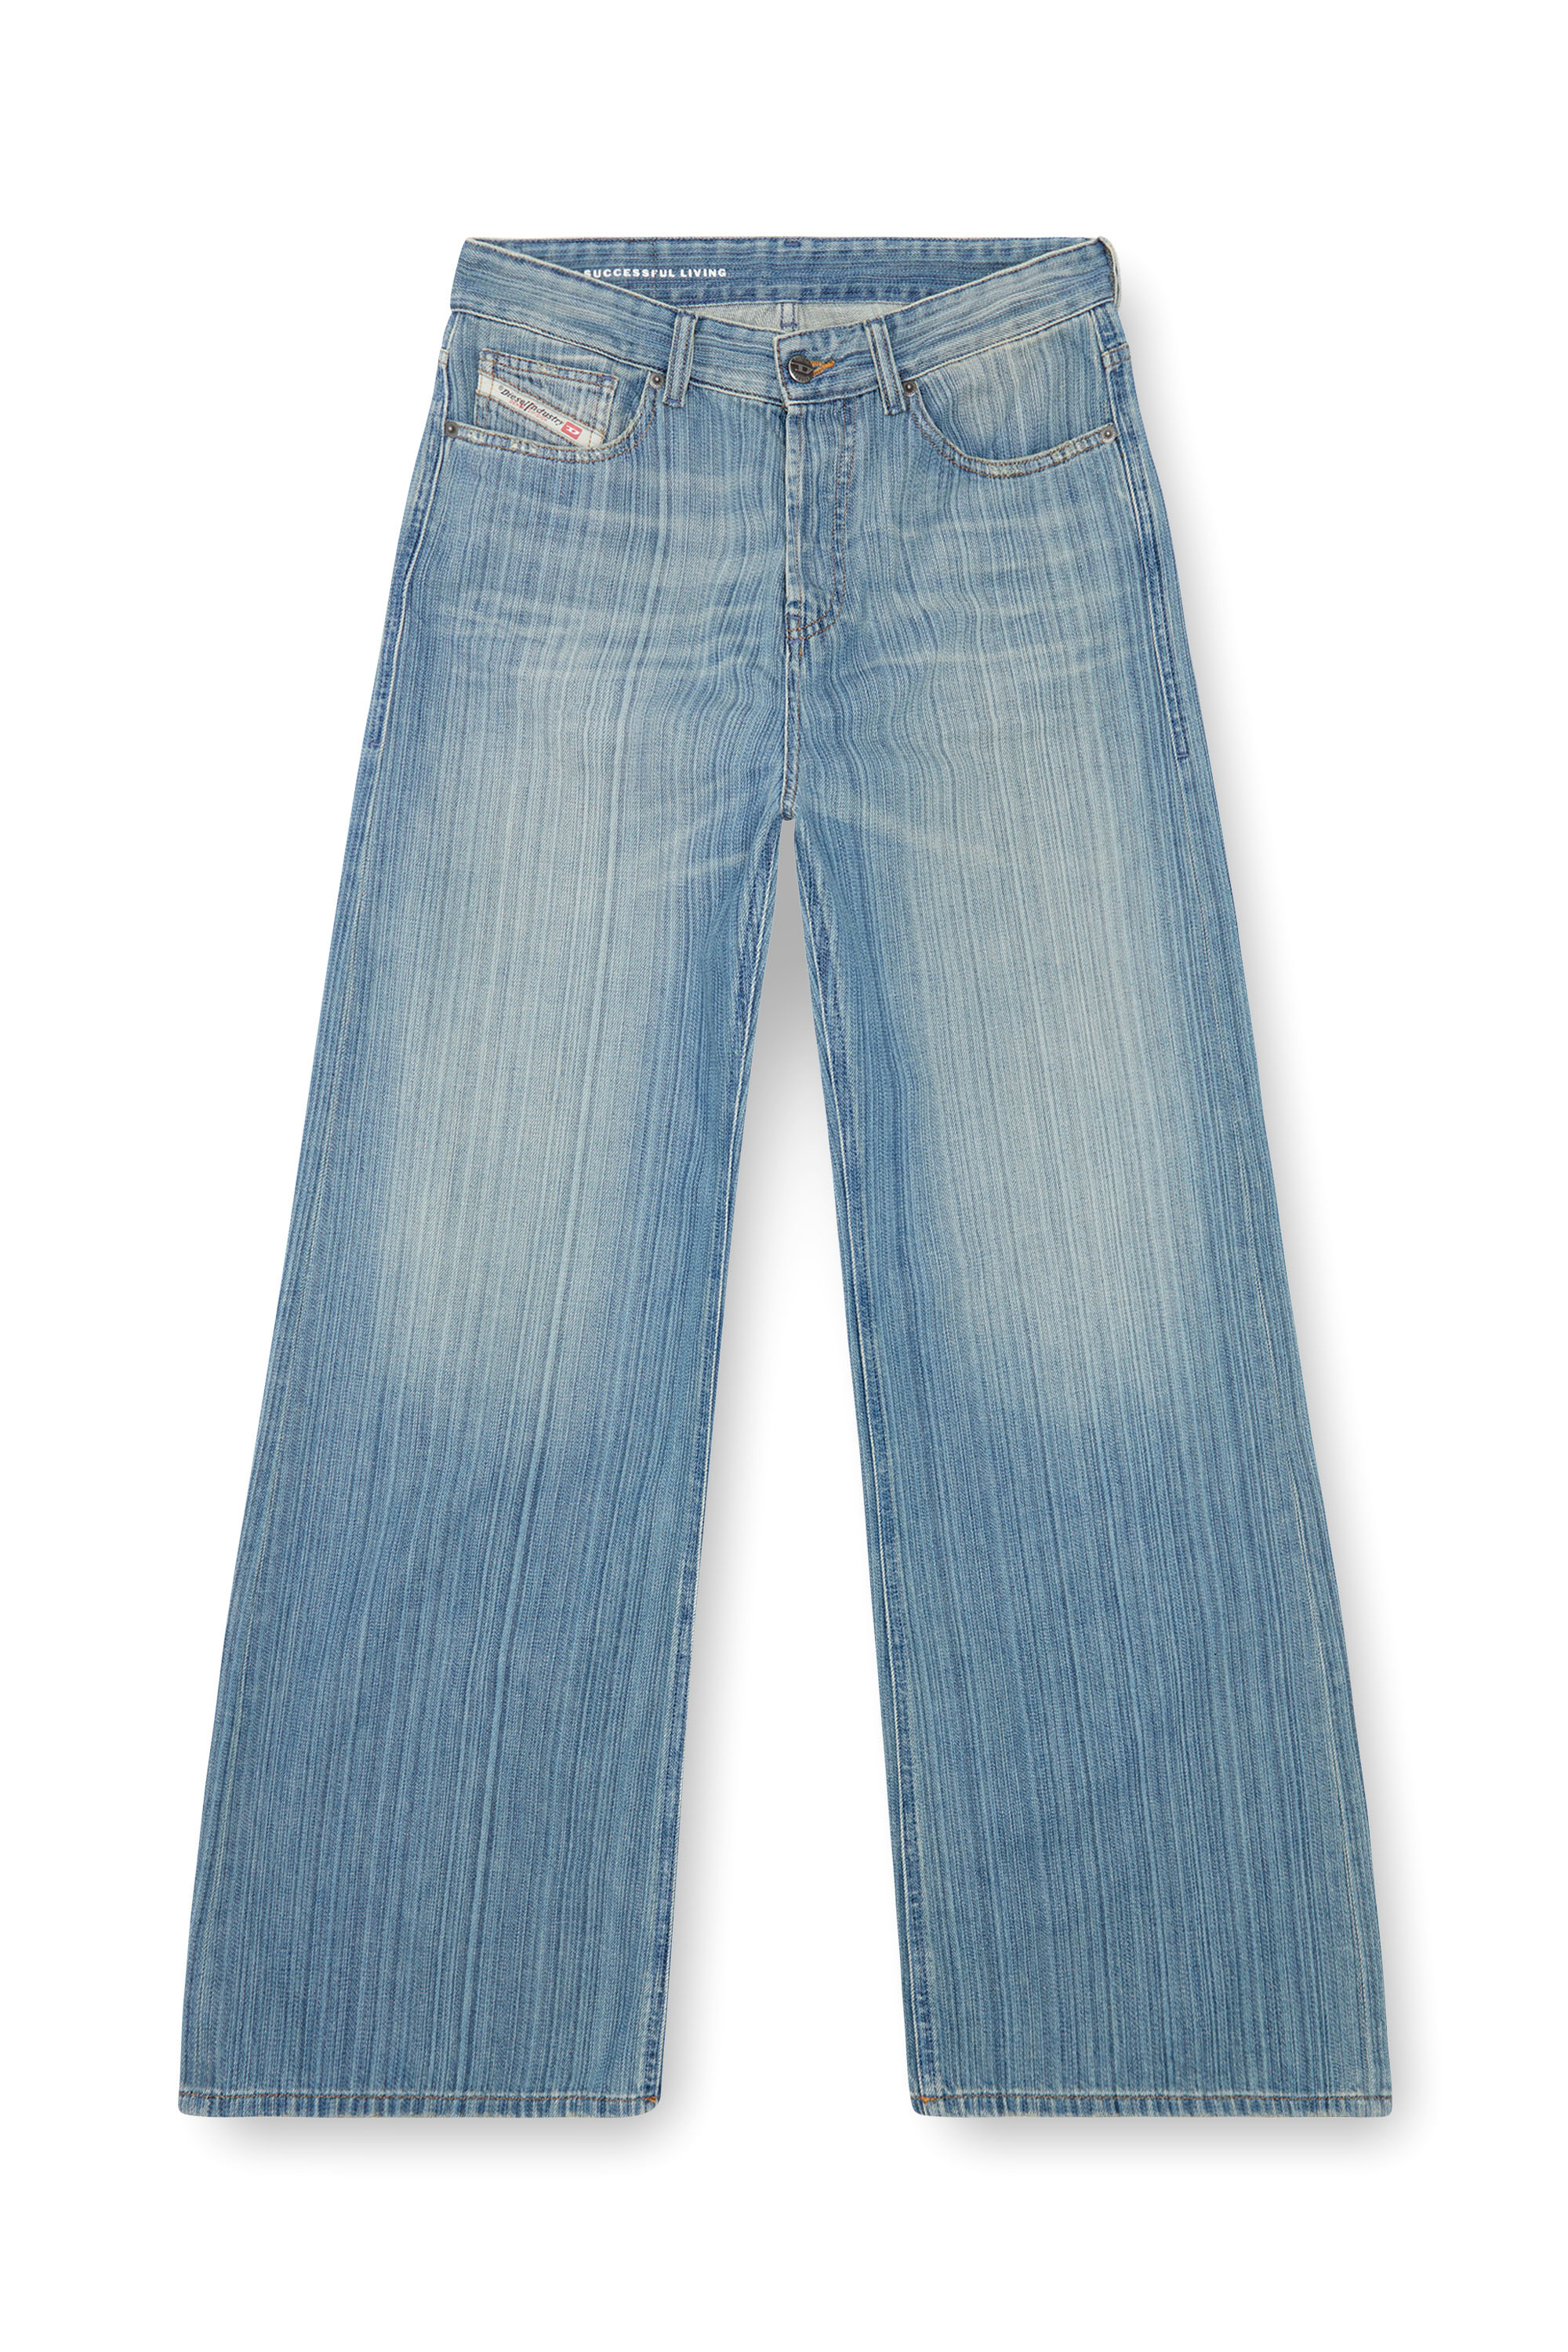 Diesel - Straight Jeans 1996 D-Sire 09J87, Mujer Straight Jeans - 1996 D-Sire in Azul marino - Image 5